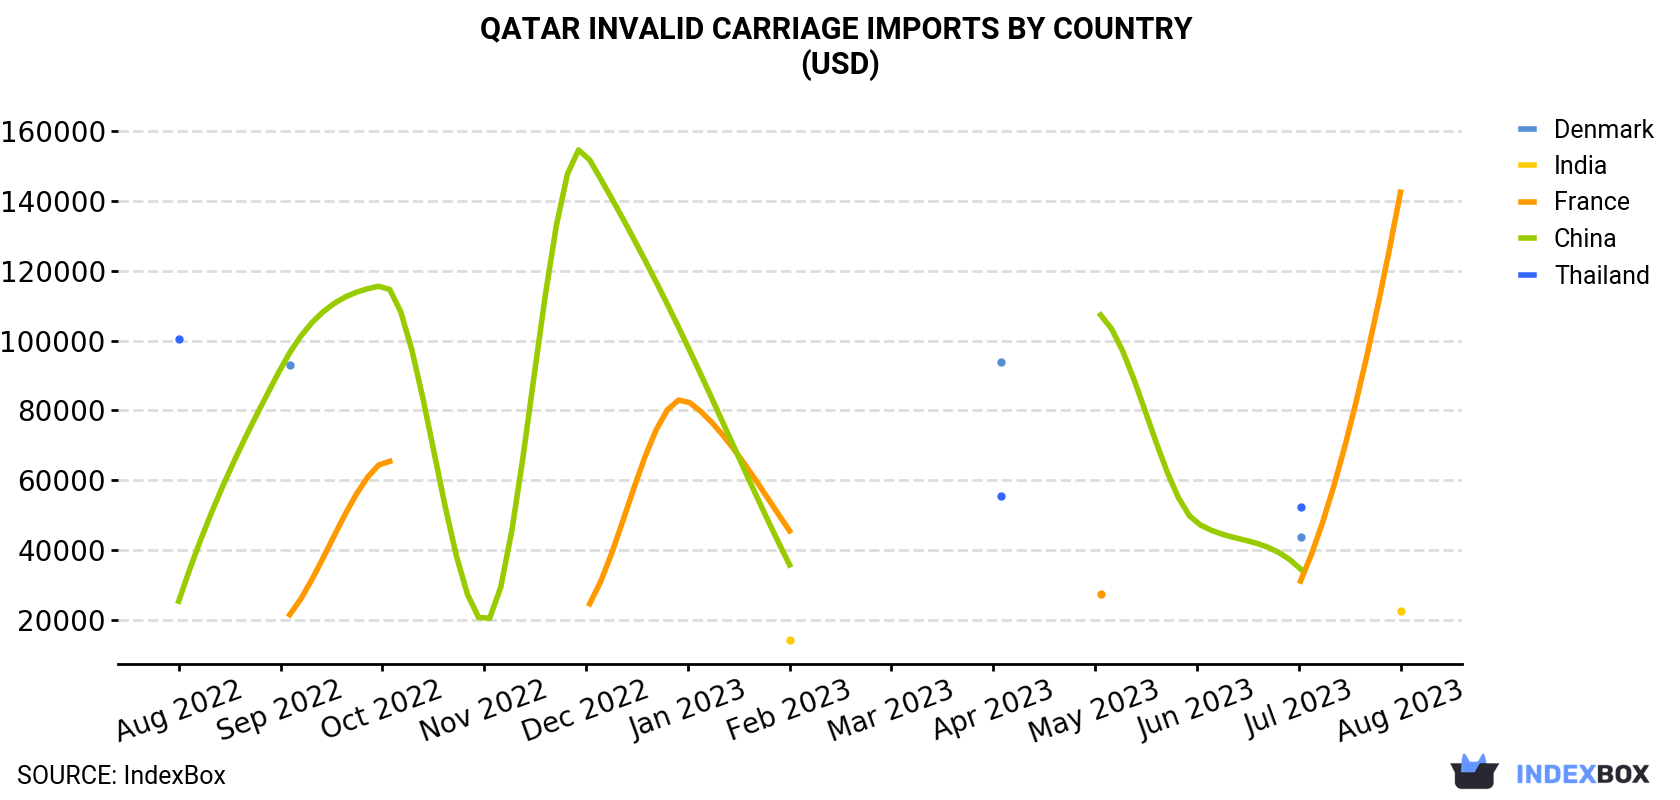 Qatar Invalid Carriage Imports By Country (USD)